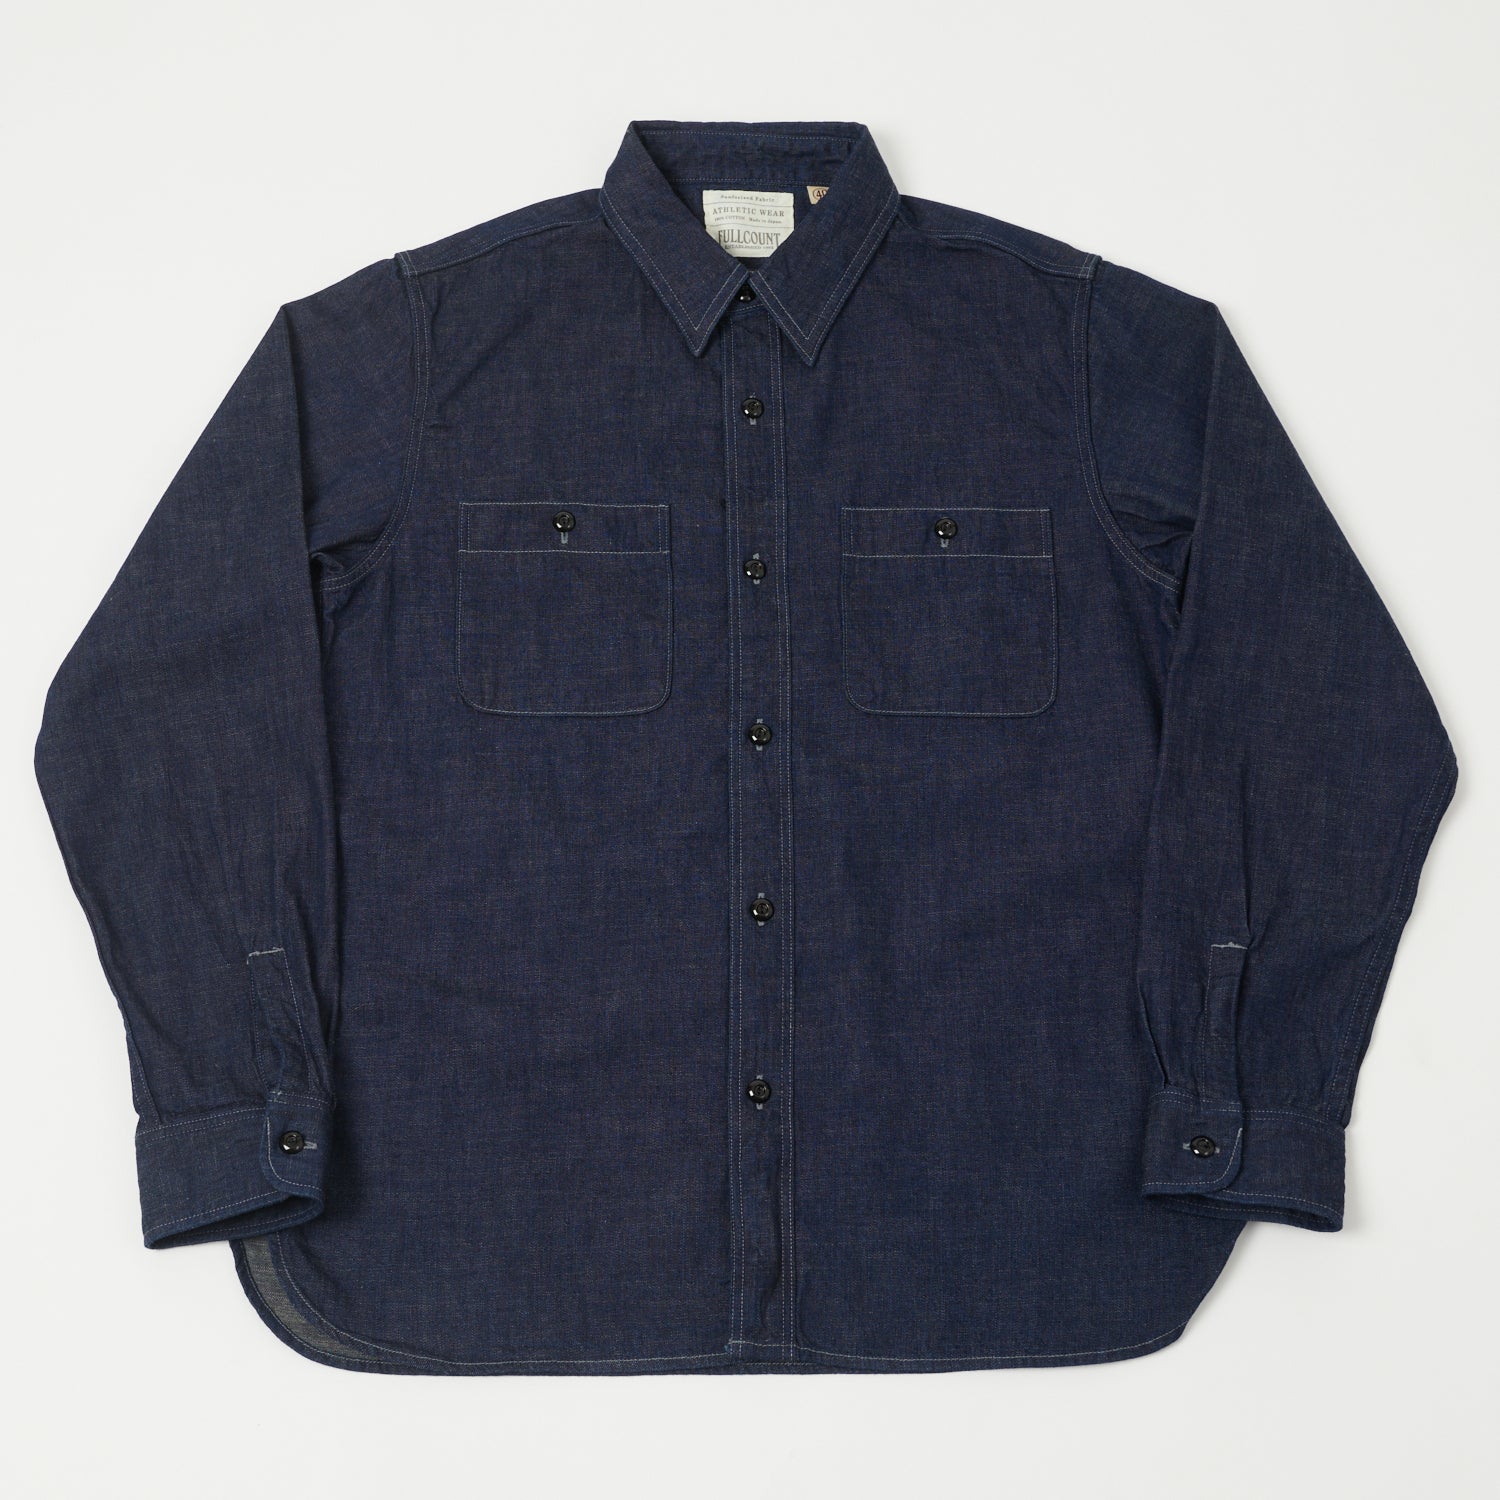 Full Count 4890 Denim Work Shirt - Rinsed | SON OF A STAG